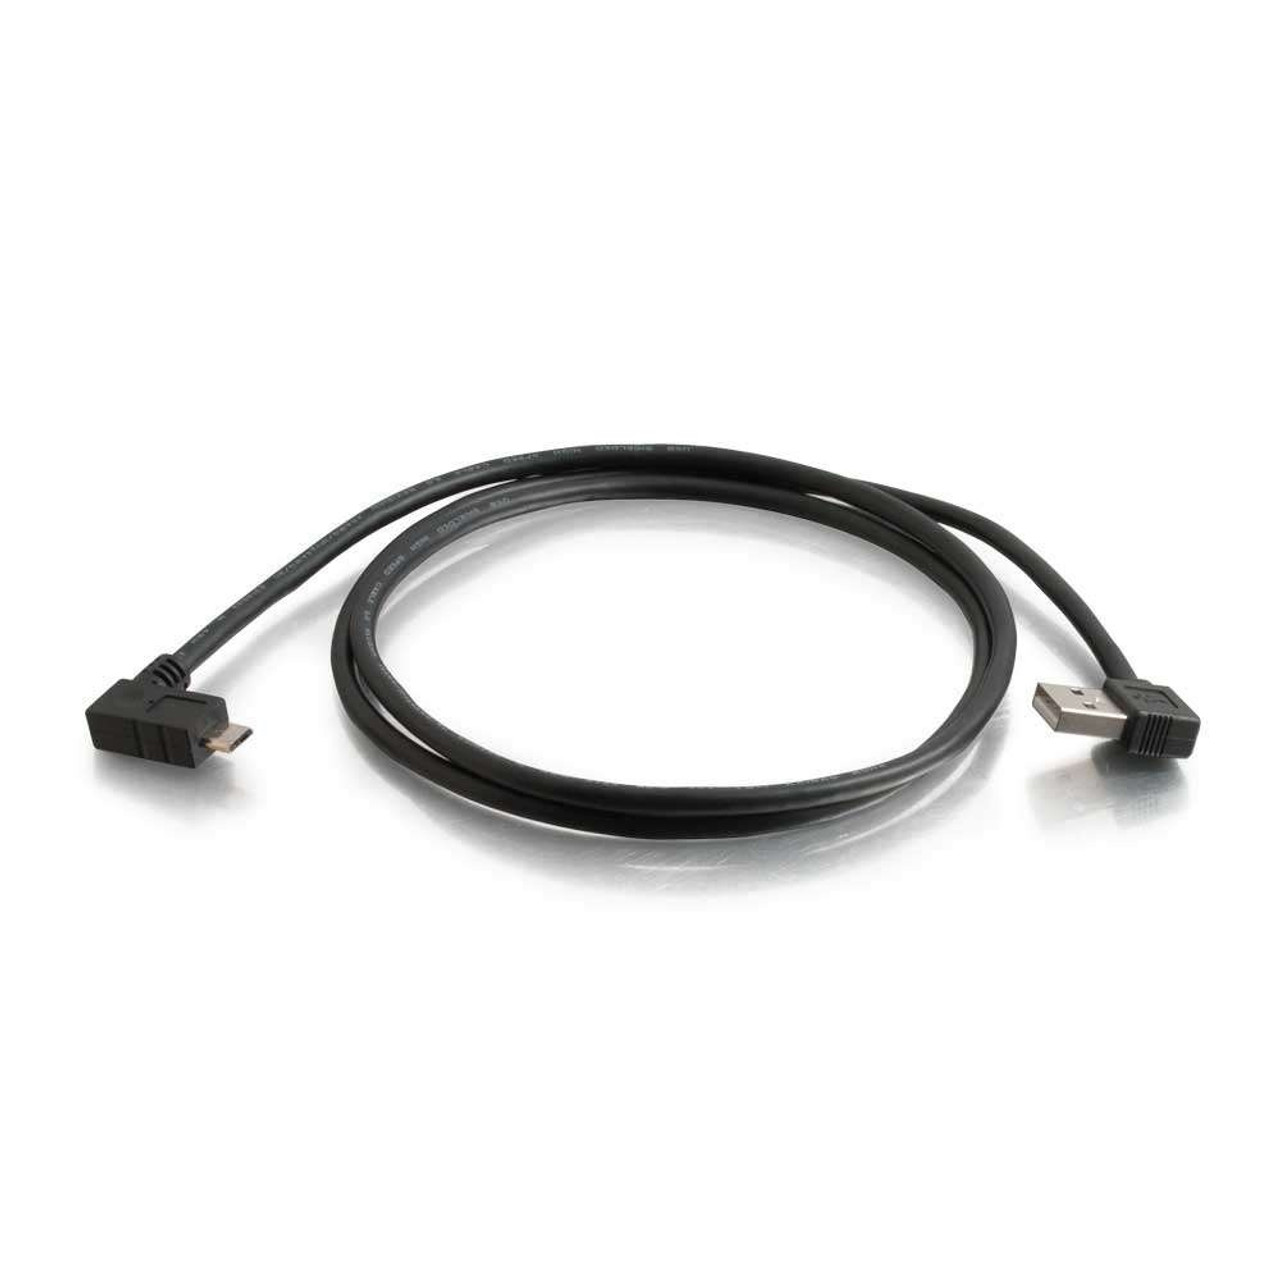 9.8ft (3m) USB 2.0 A to Micro-B Cable M/M - Black (3m)